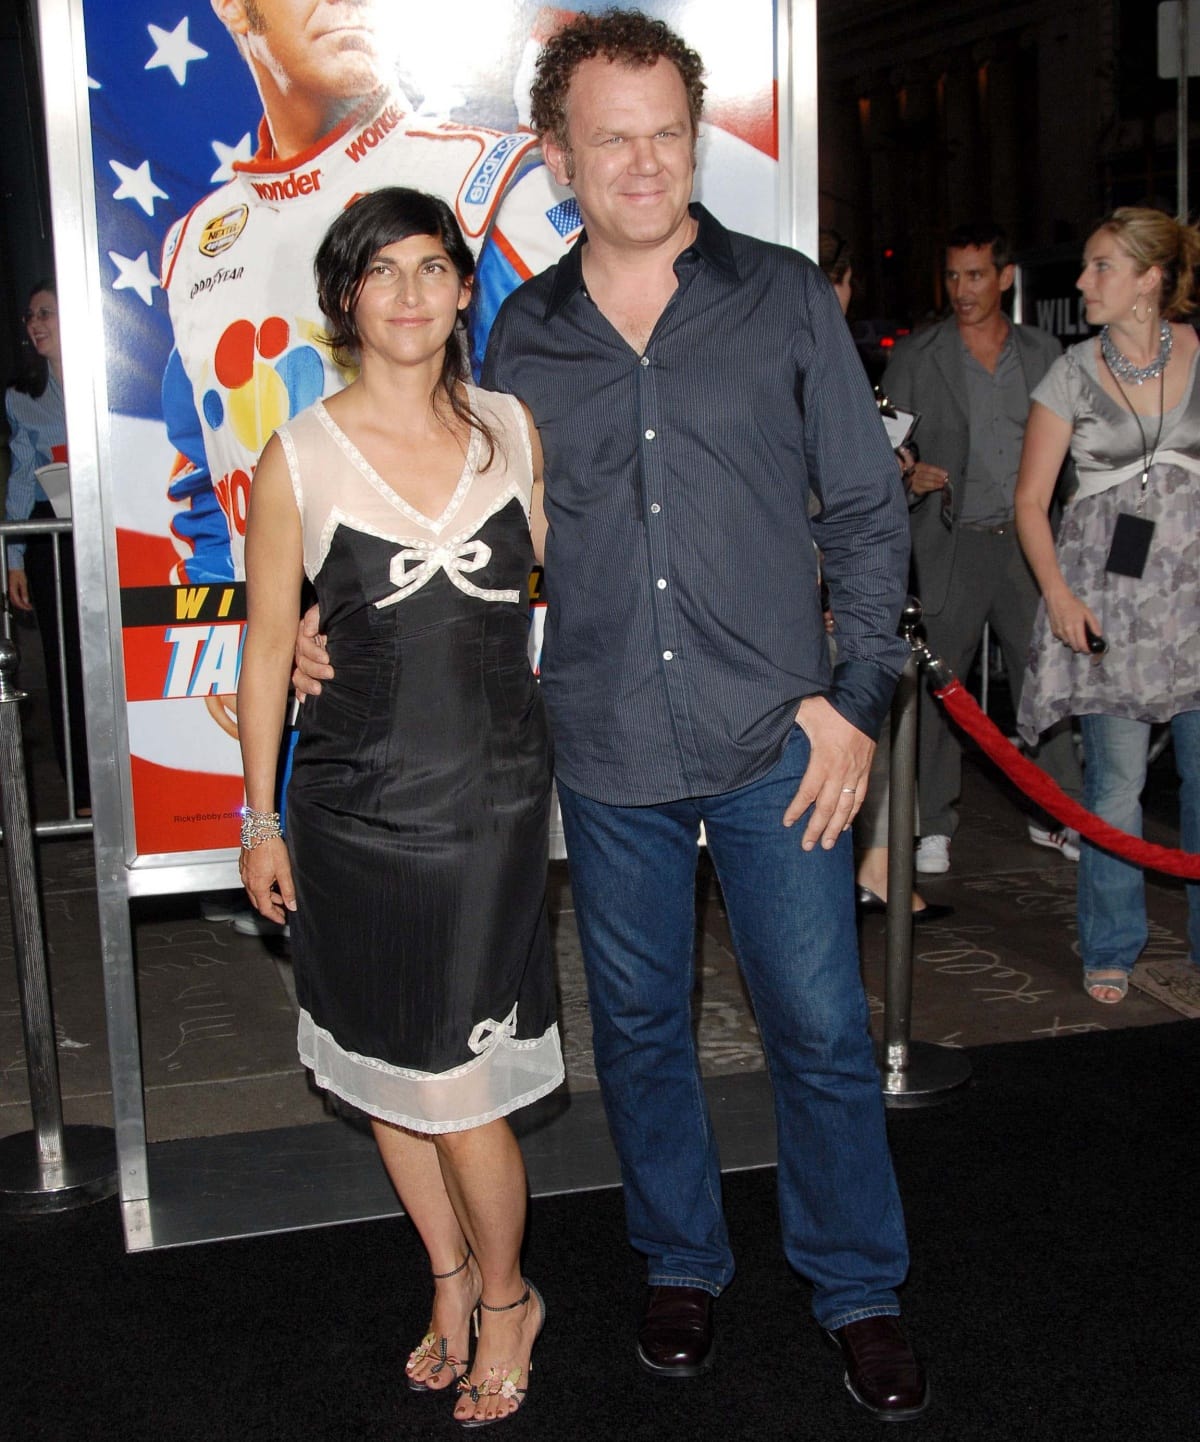 John C. Reilly towering over his wife Alison Dickey at the world premiere of Talladega Nights: The Ballad of Ricky Bobby